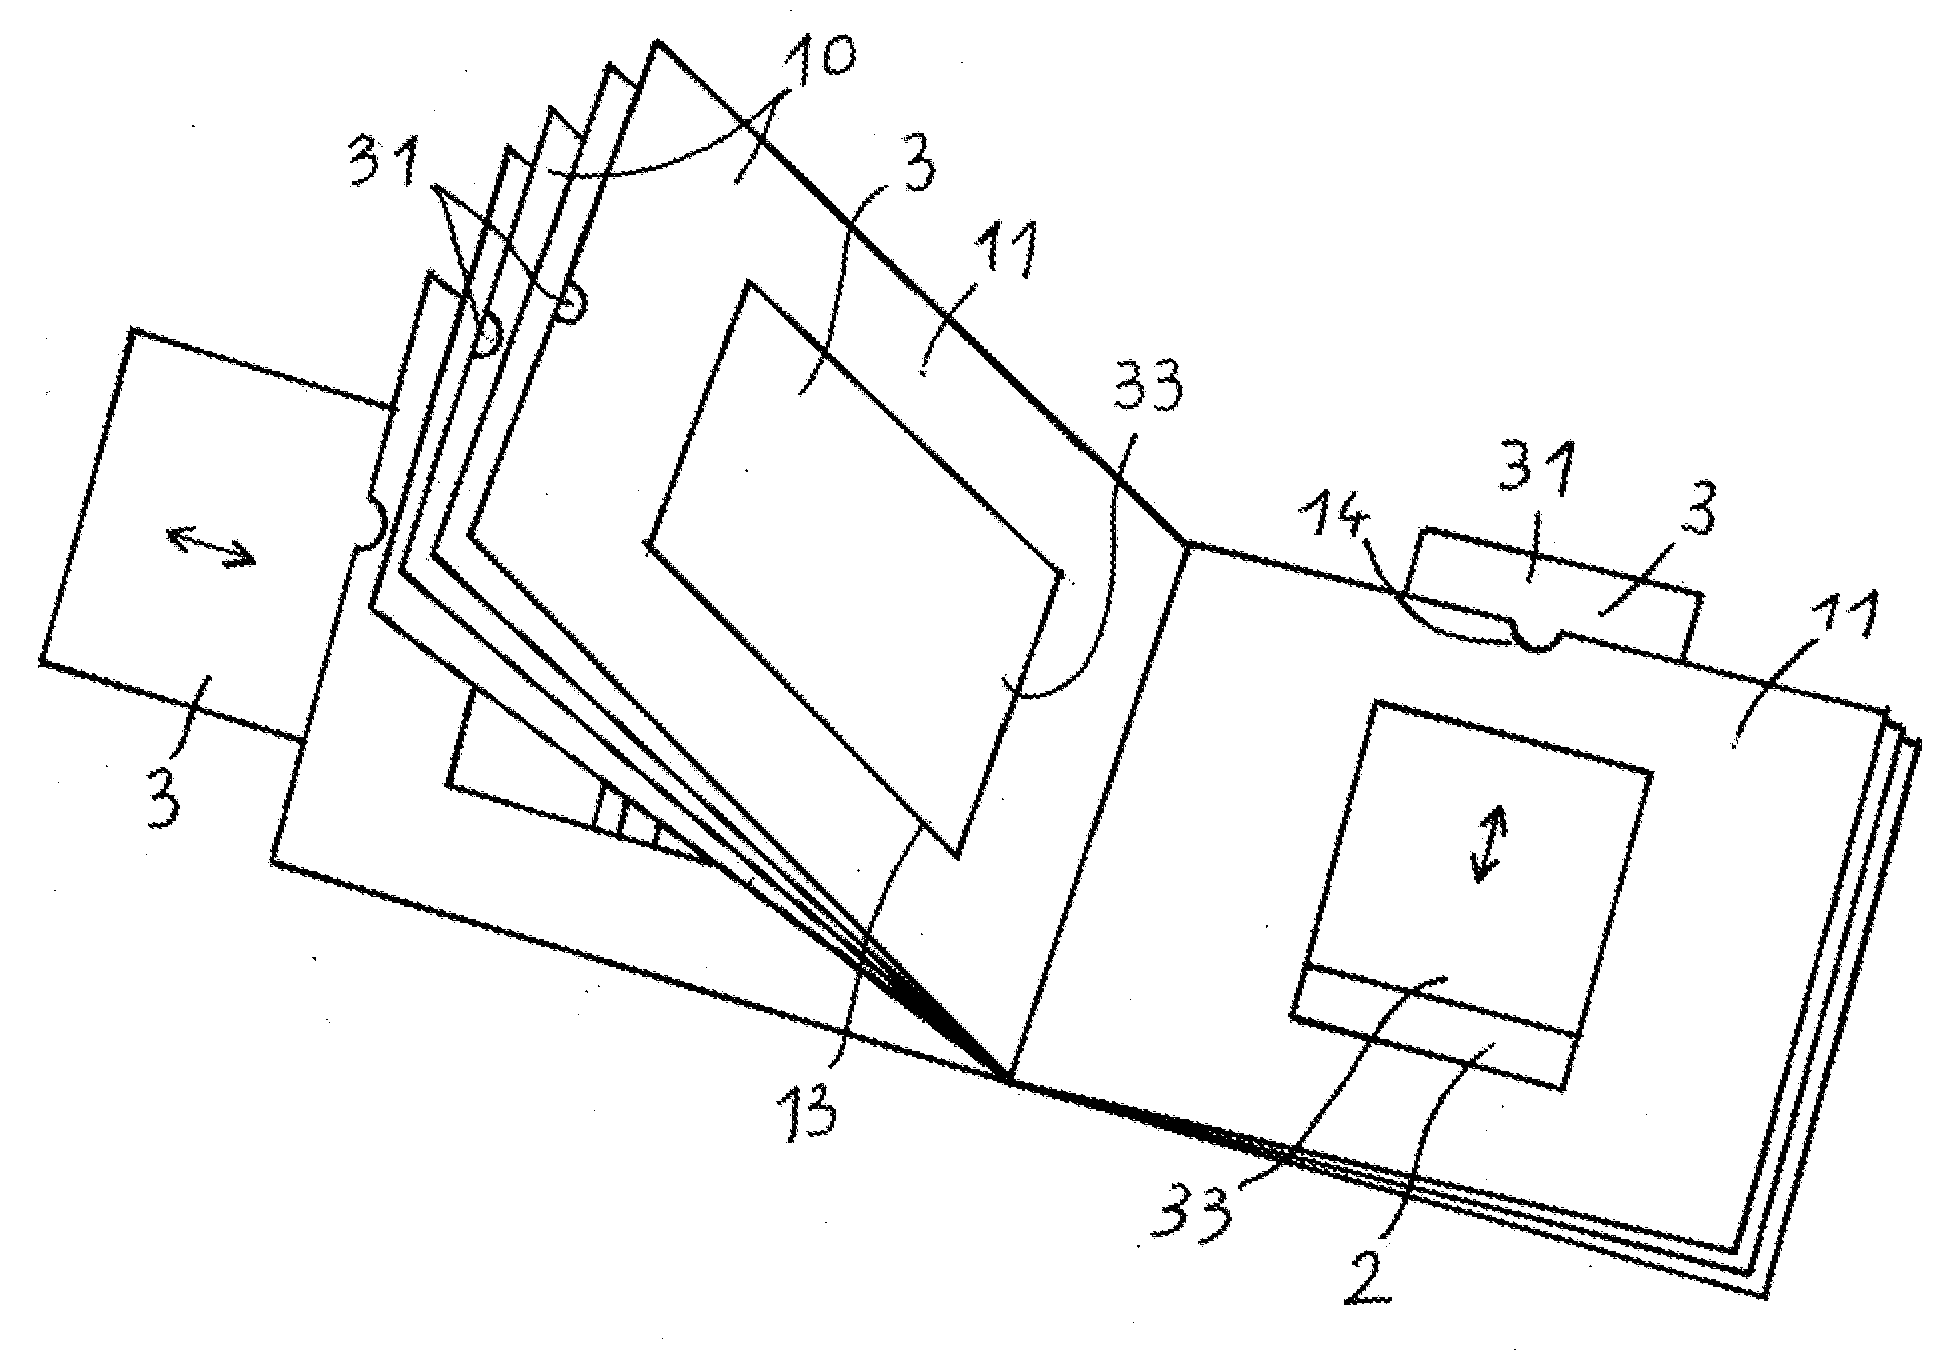 Panel Comprising at Least One Display Window, and Various Uses of Such a Panel